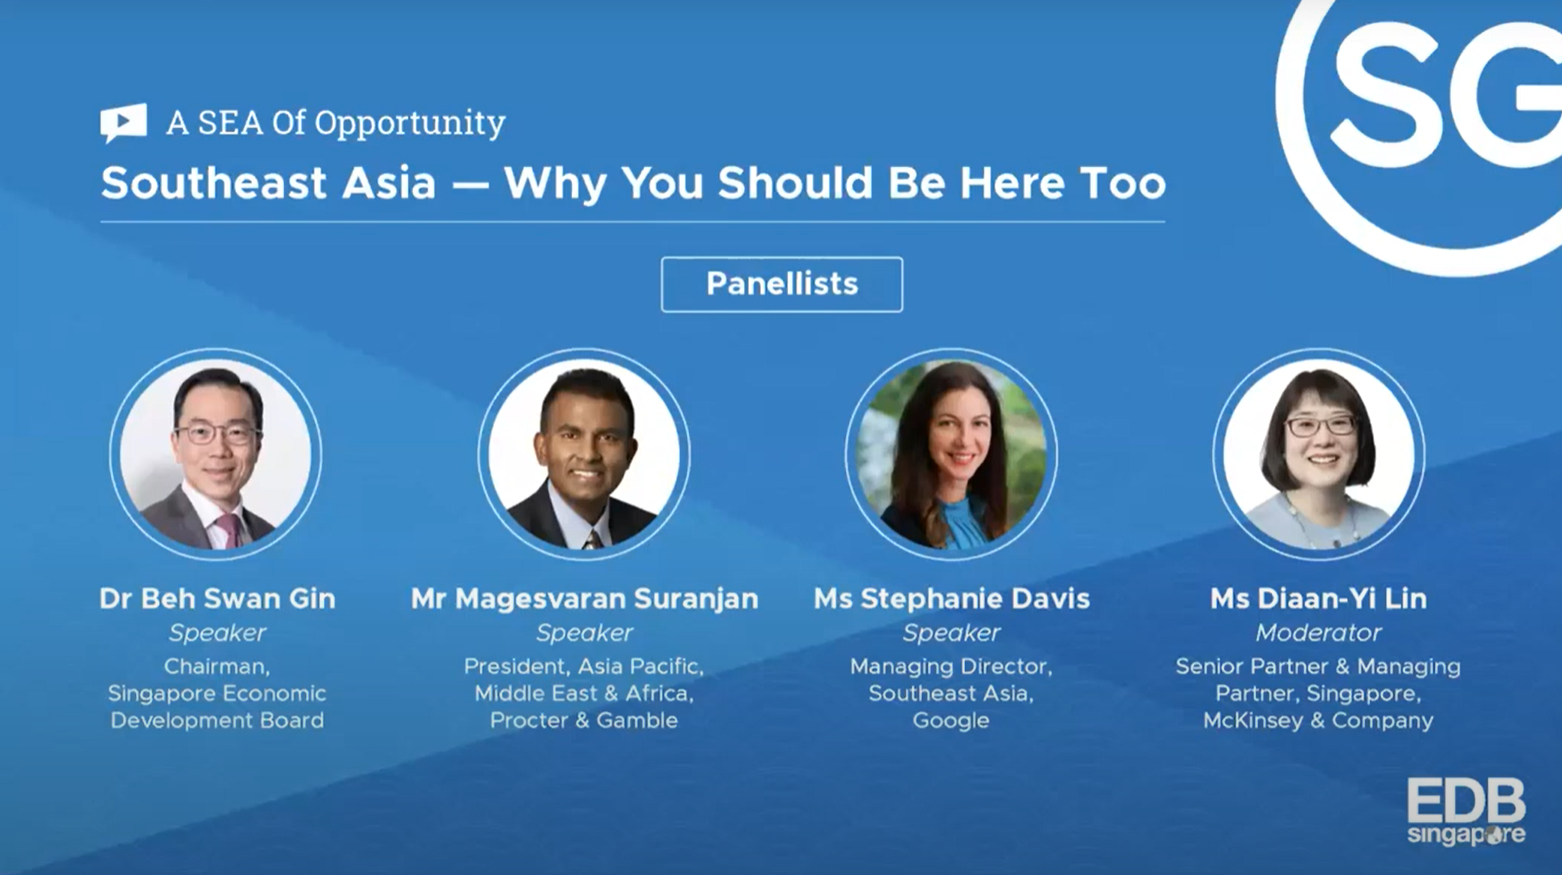 A SEA of Opportunity Webinar Series - Seizing Business Opportunities in Southeast Asia